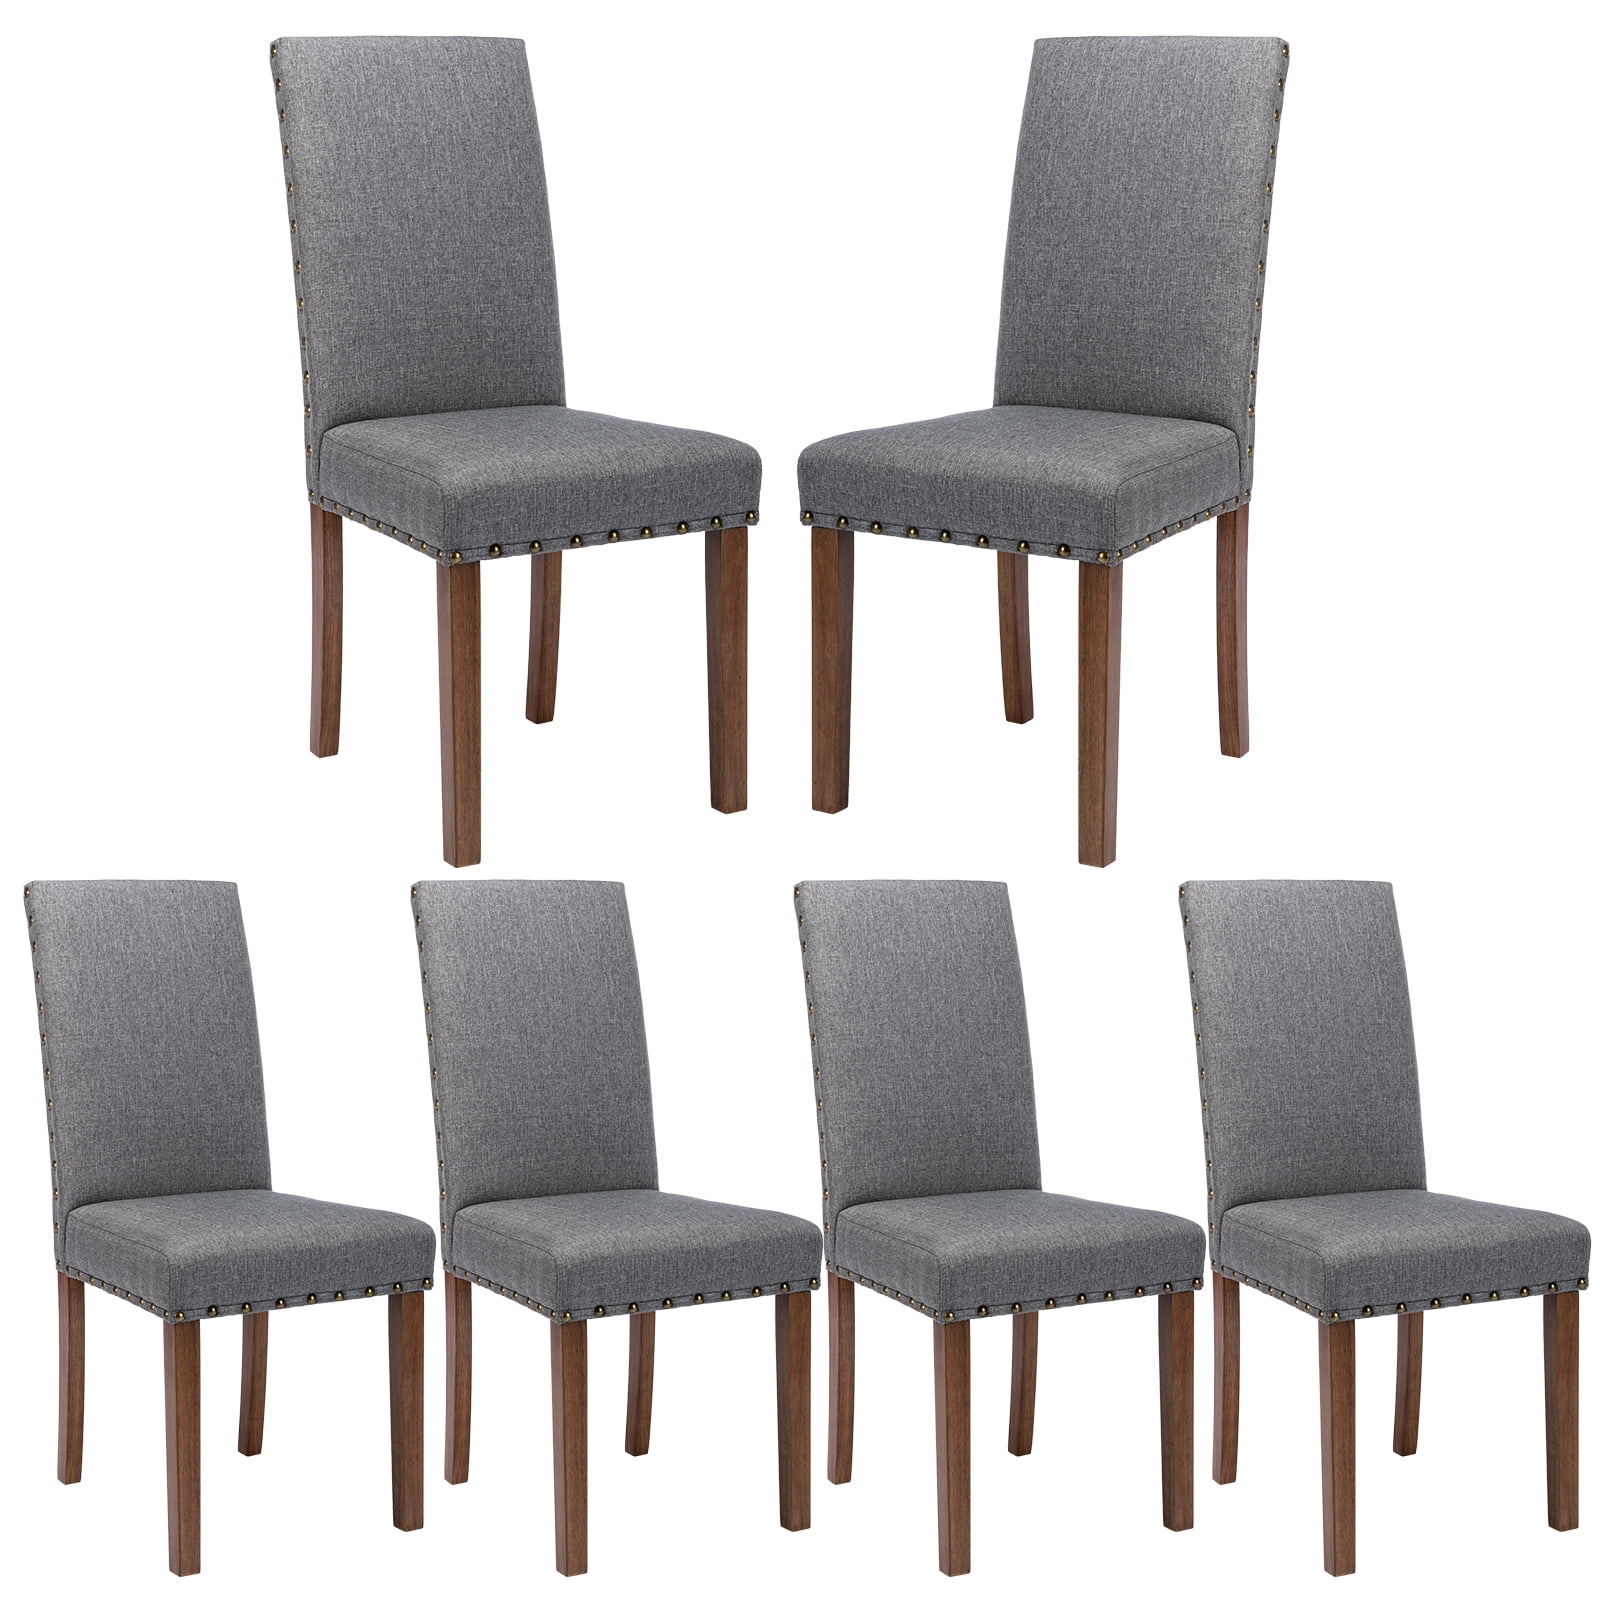 Snugway Handcraft Linen Solid Wood Parson Chair,Dining Chair,Set of 6 ...